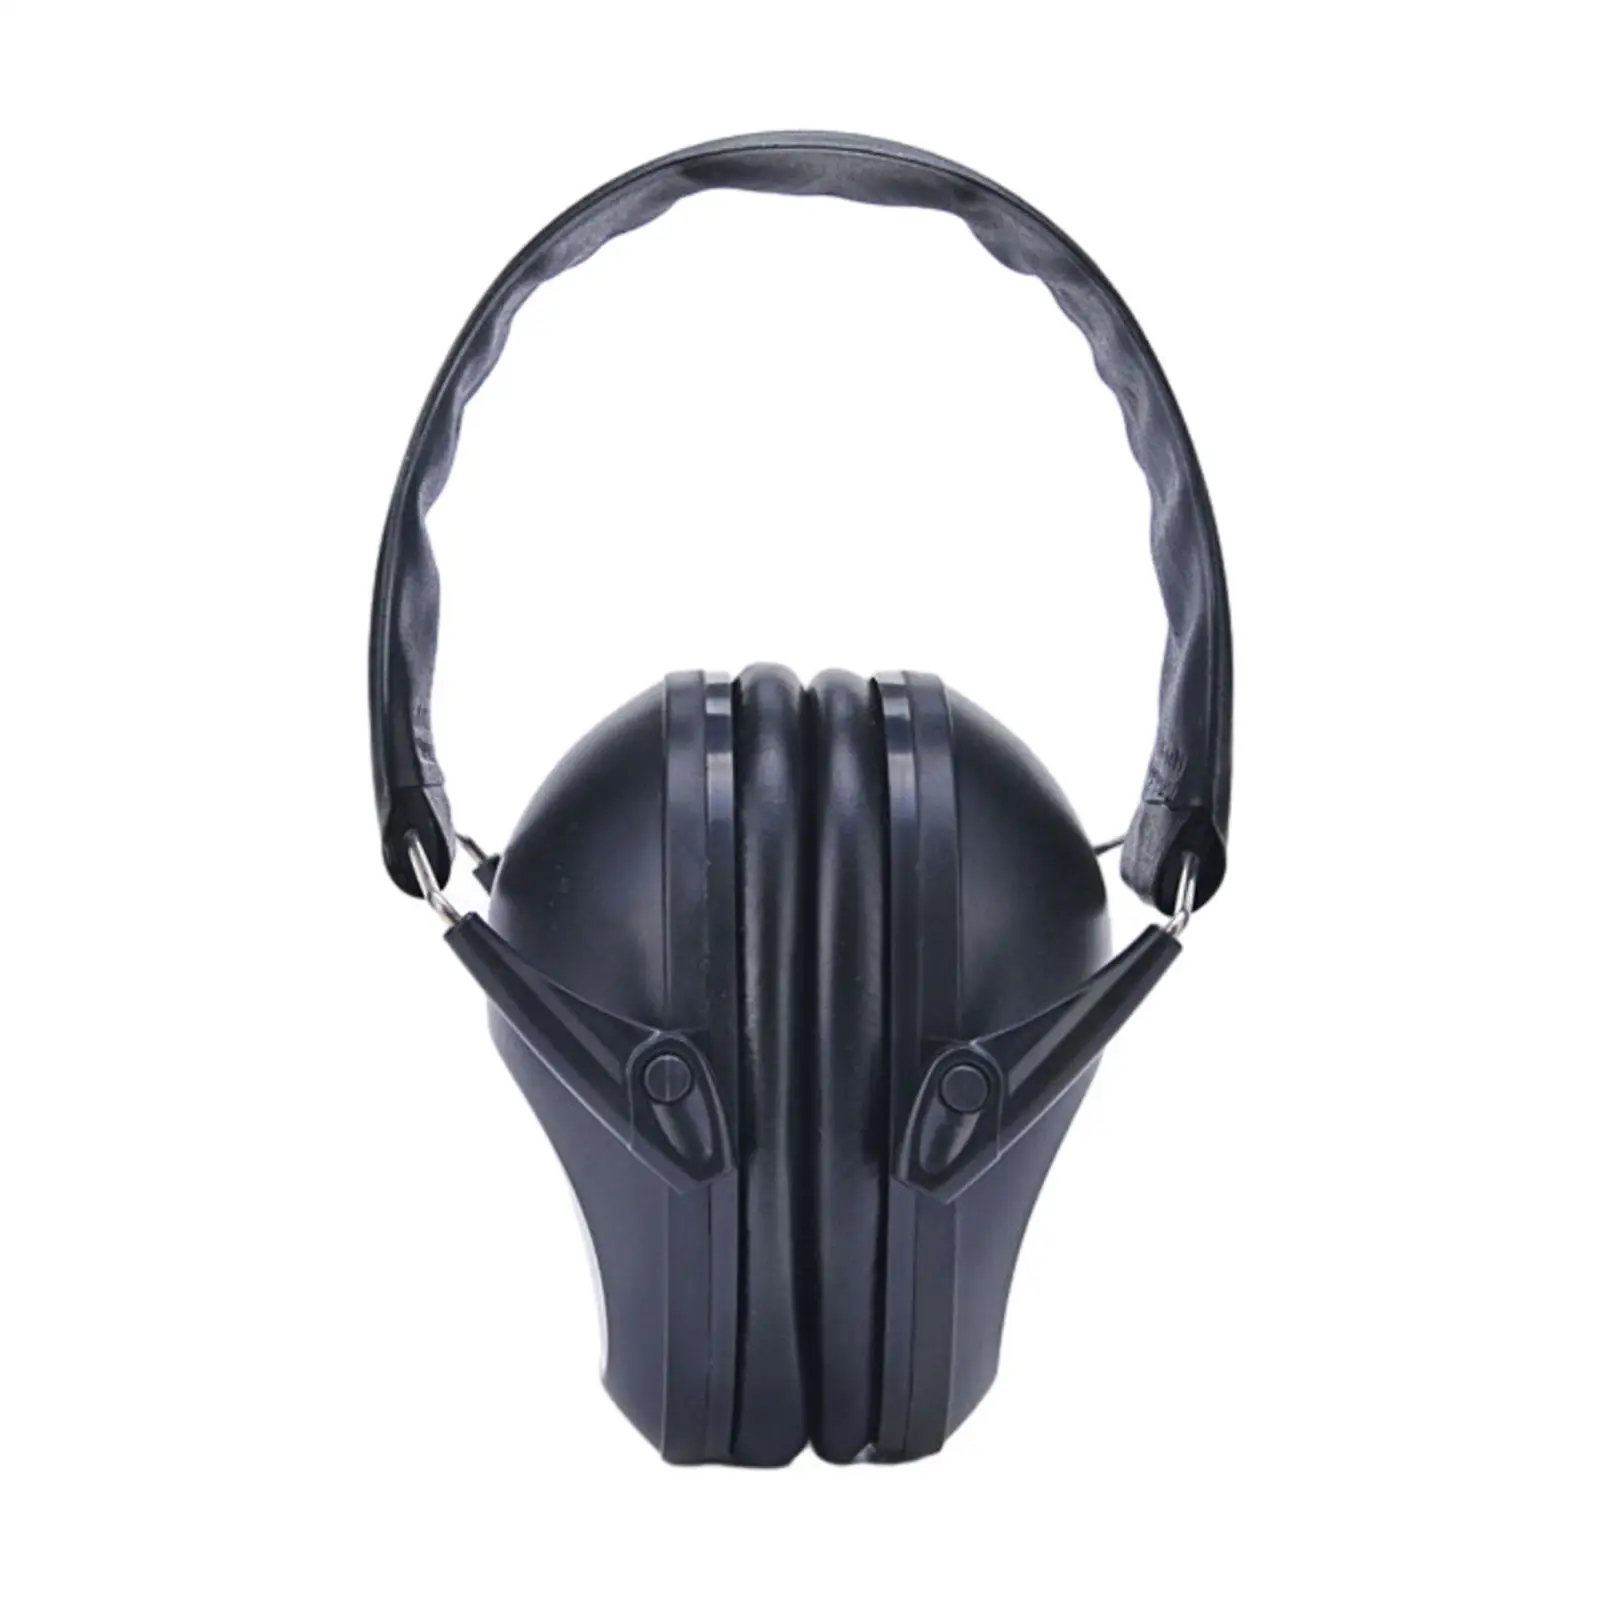 Hearing Protection Ear Muff Noise Reduction Ear Defenders Ear Covers for Travel Construction Lawn Mowing Manufacturing Office